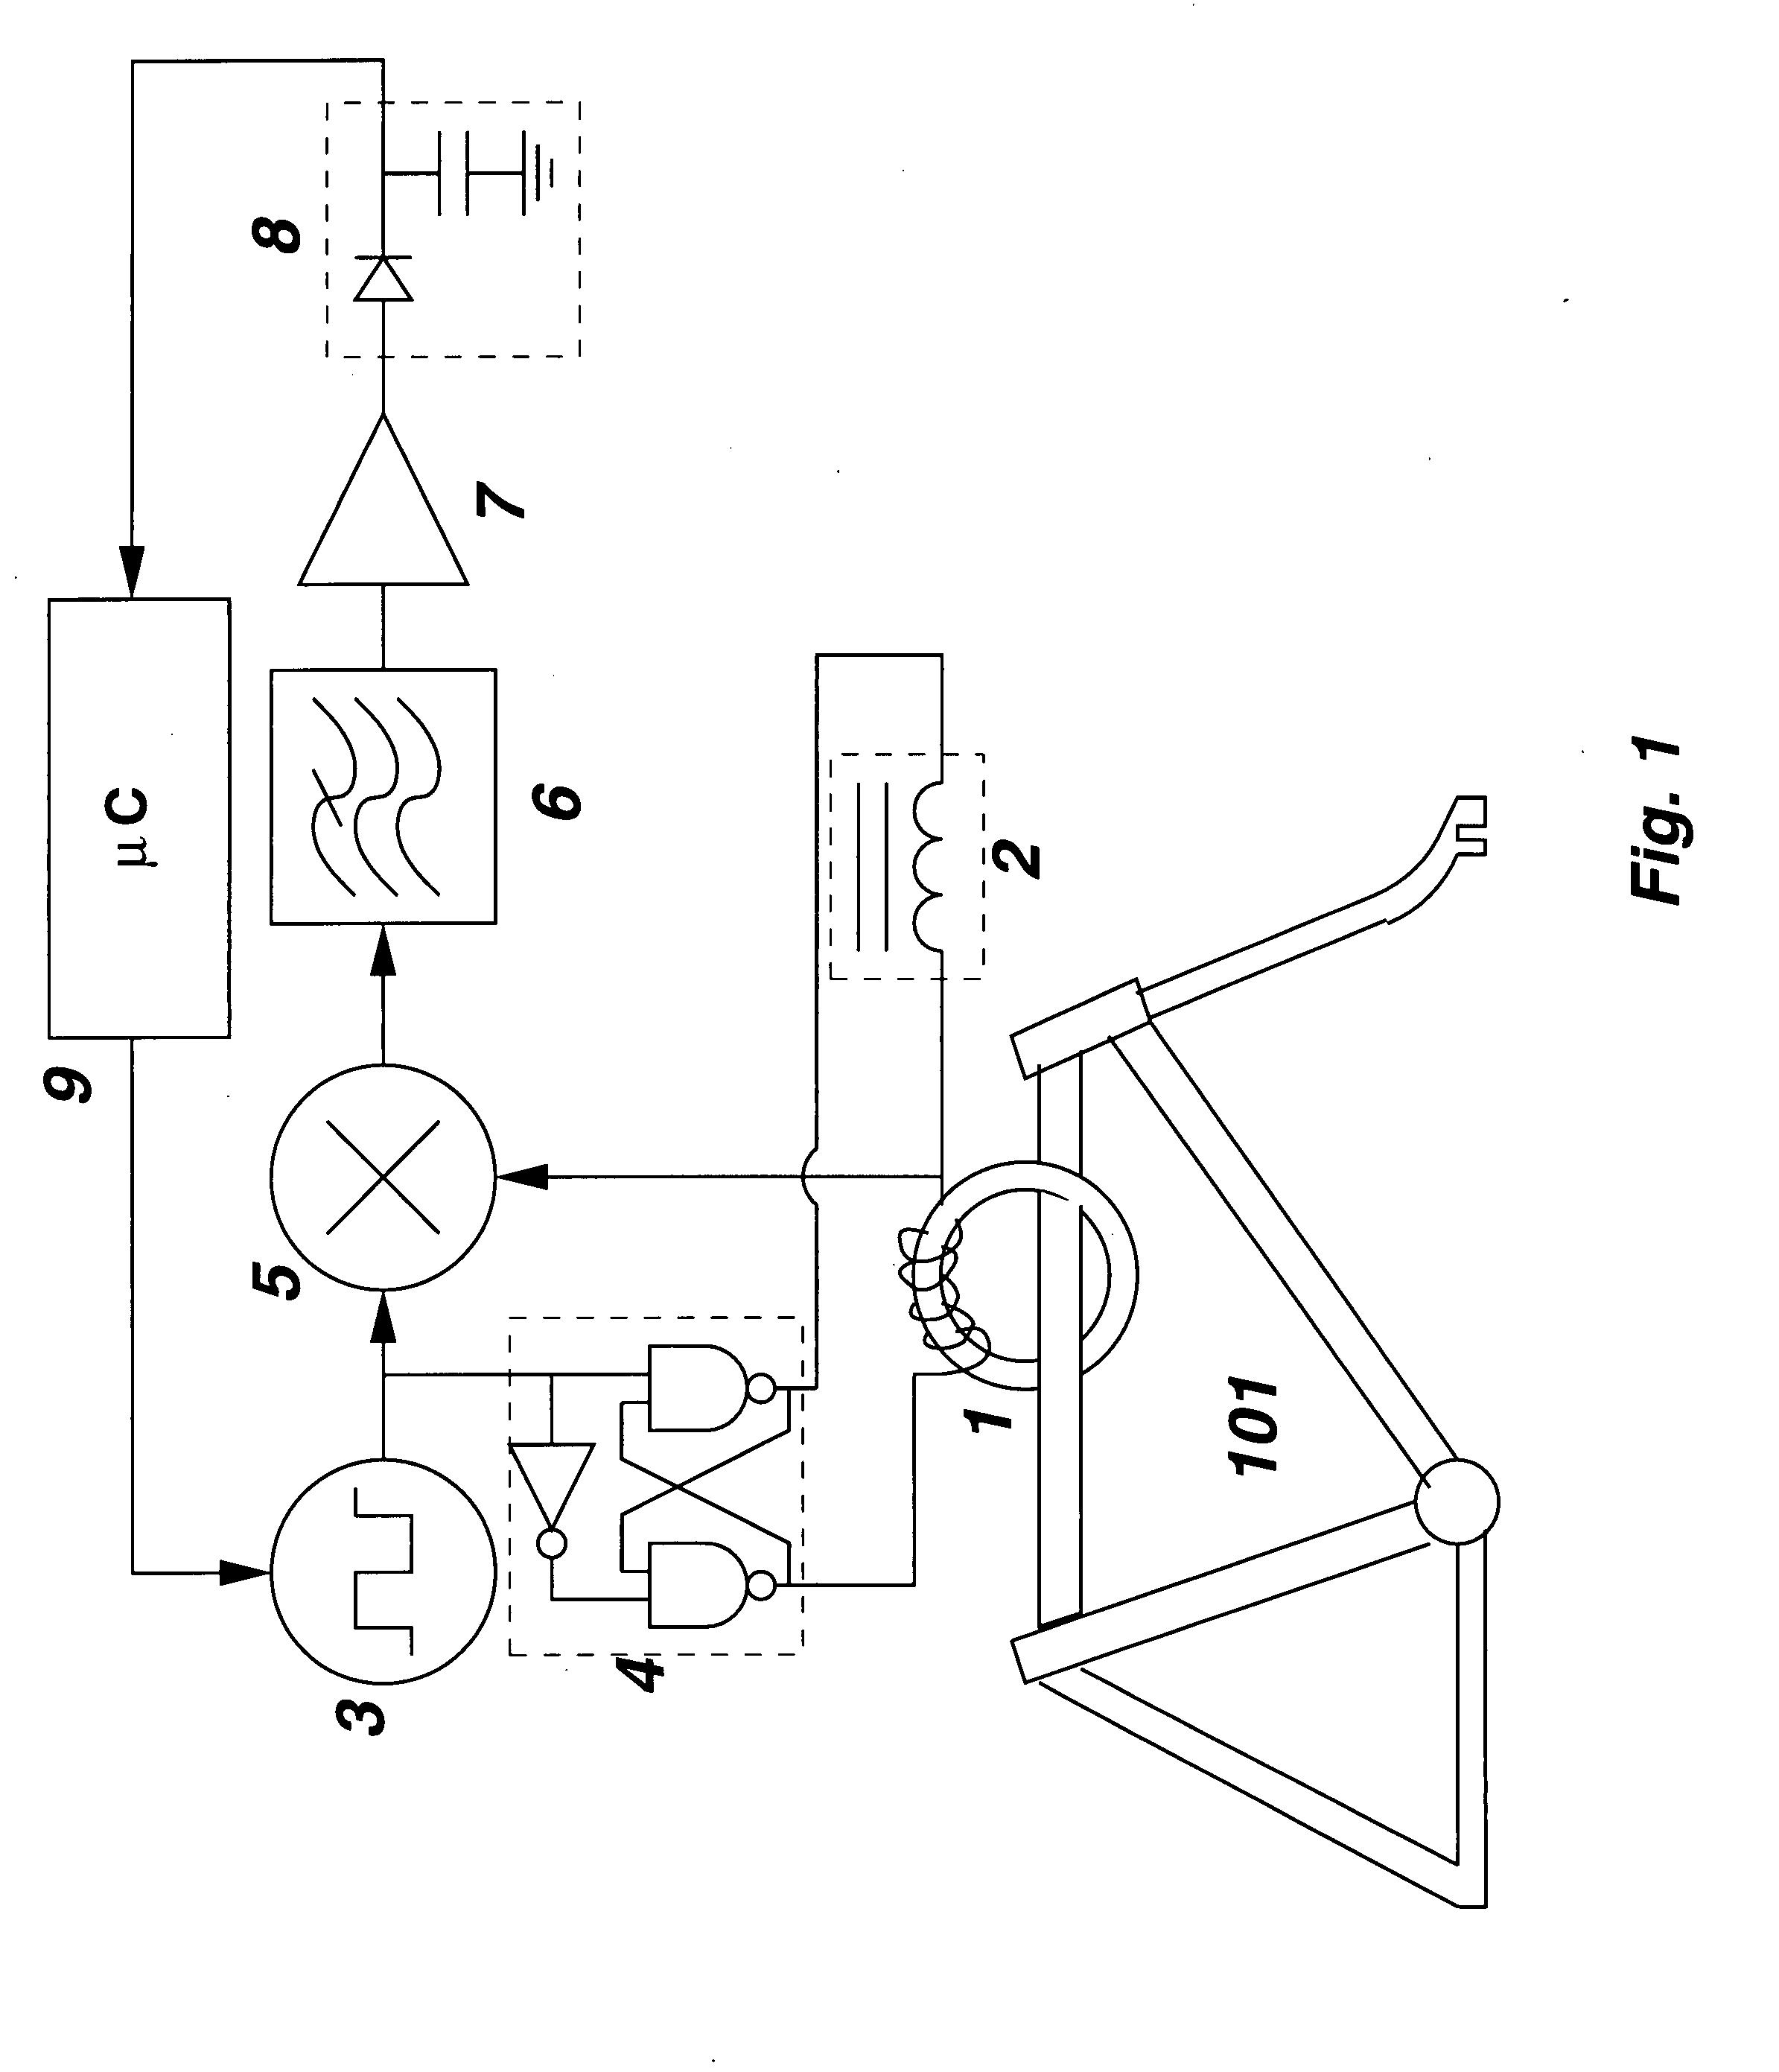 Device for activating inductive loop sensor of a traffic light control system